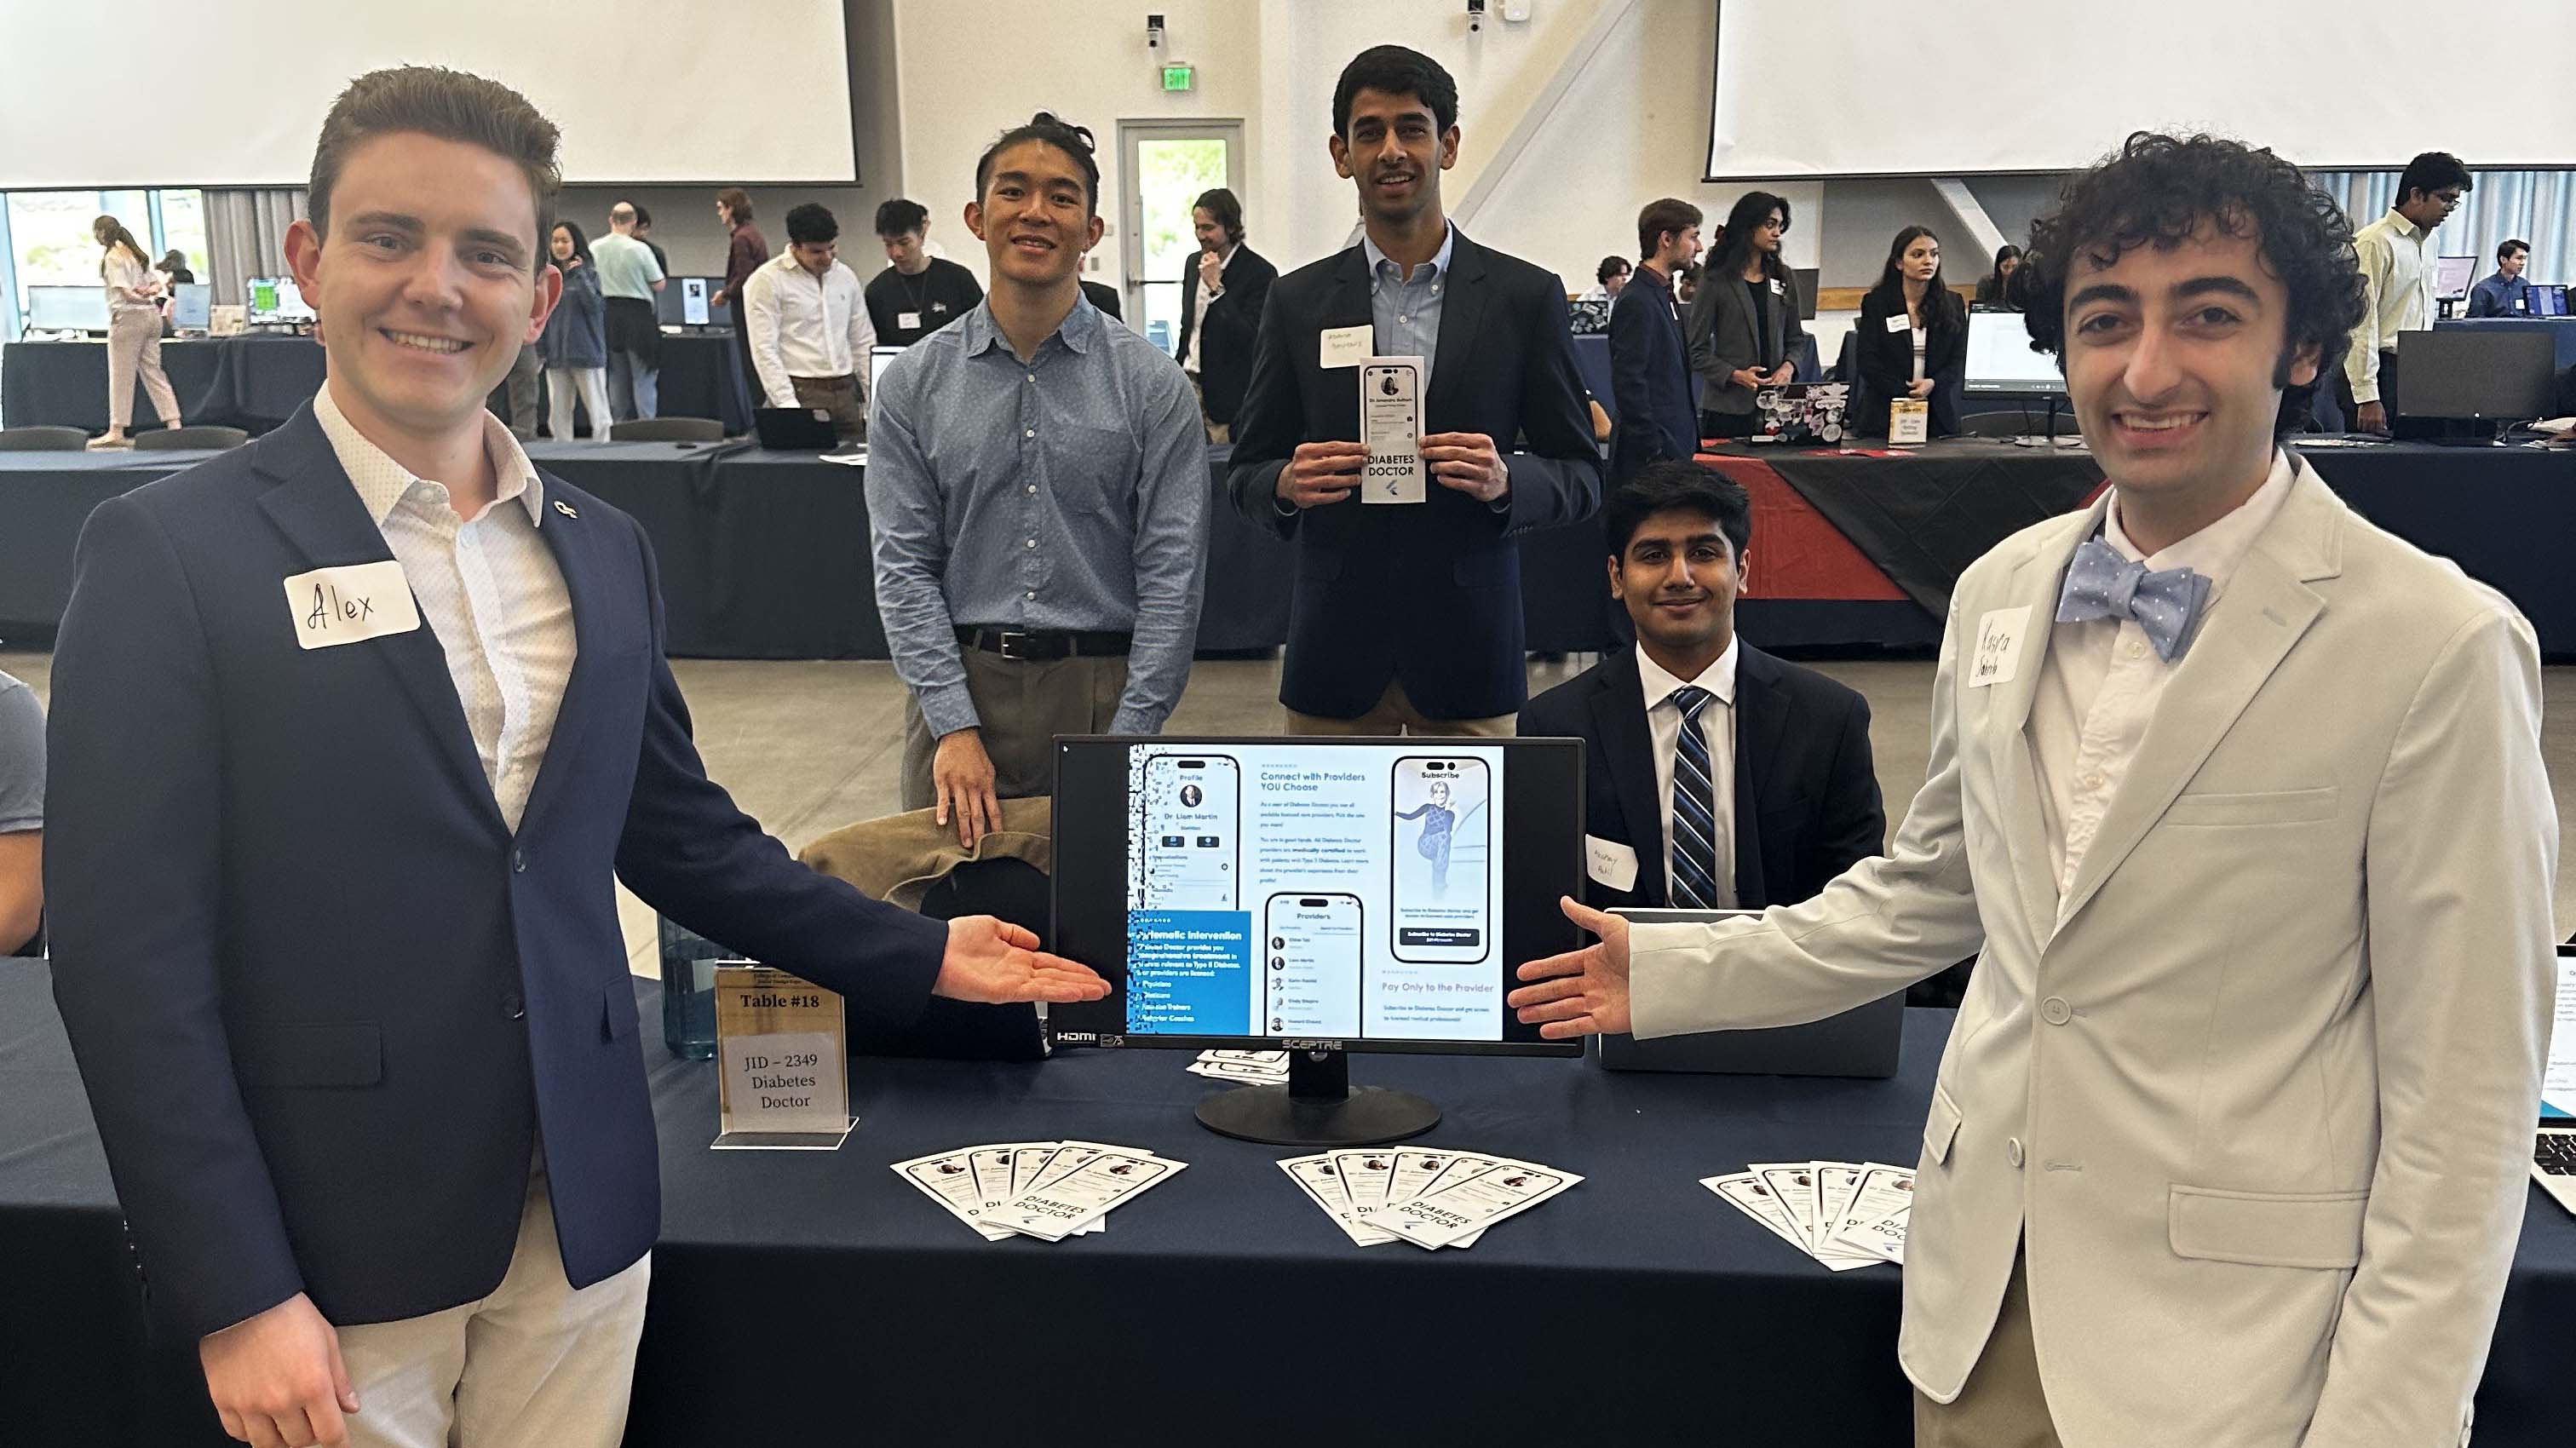 The Diabetes Doctor team placed second at the CS Junior Design Capstone Expo. 